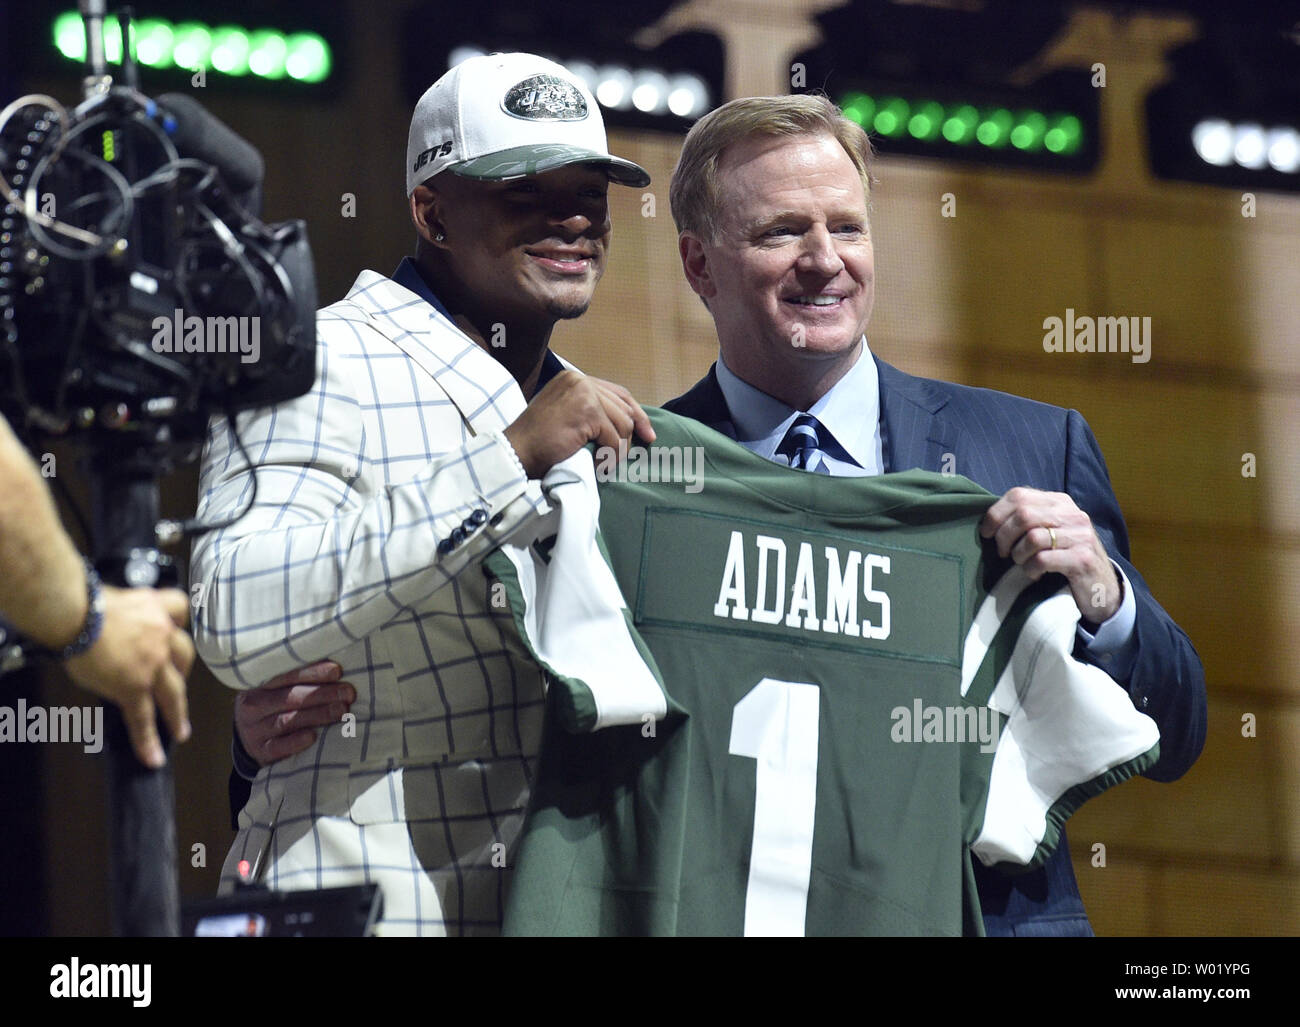 Jamal Adams poses for photographs with NFL Commissioner Roger Goodell after being selected by the New York Jets as the sixth overall pick in the 2017 NFL Draft at the NFL Draft Theater in Philadelphia, PA on April 27, 2017. The 82nd NFL Draft returned to Philadelphia for the first time in more than 50 years and runs from April 27-29. Photo by Derik Hamilton/UPI Stock Photo